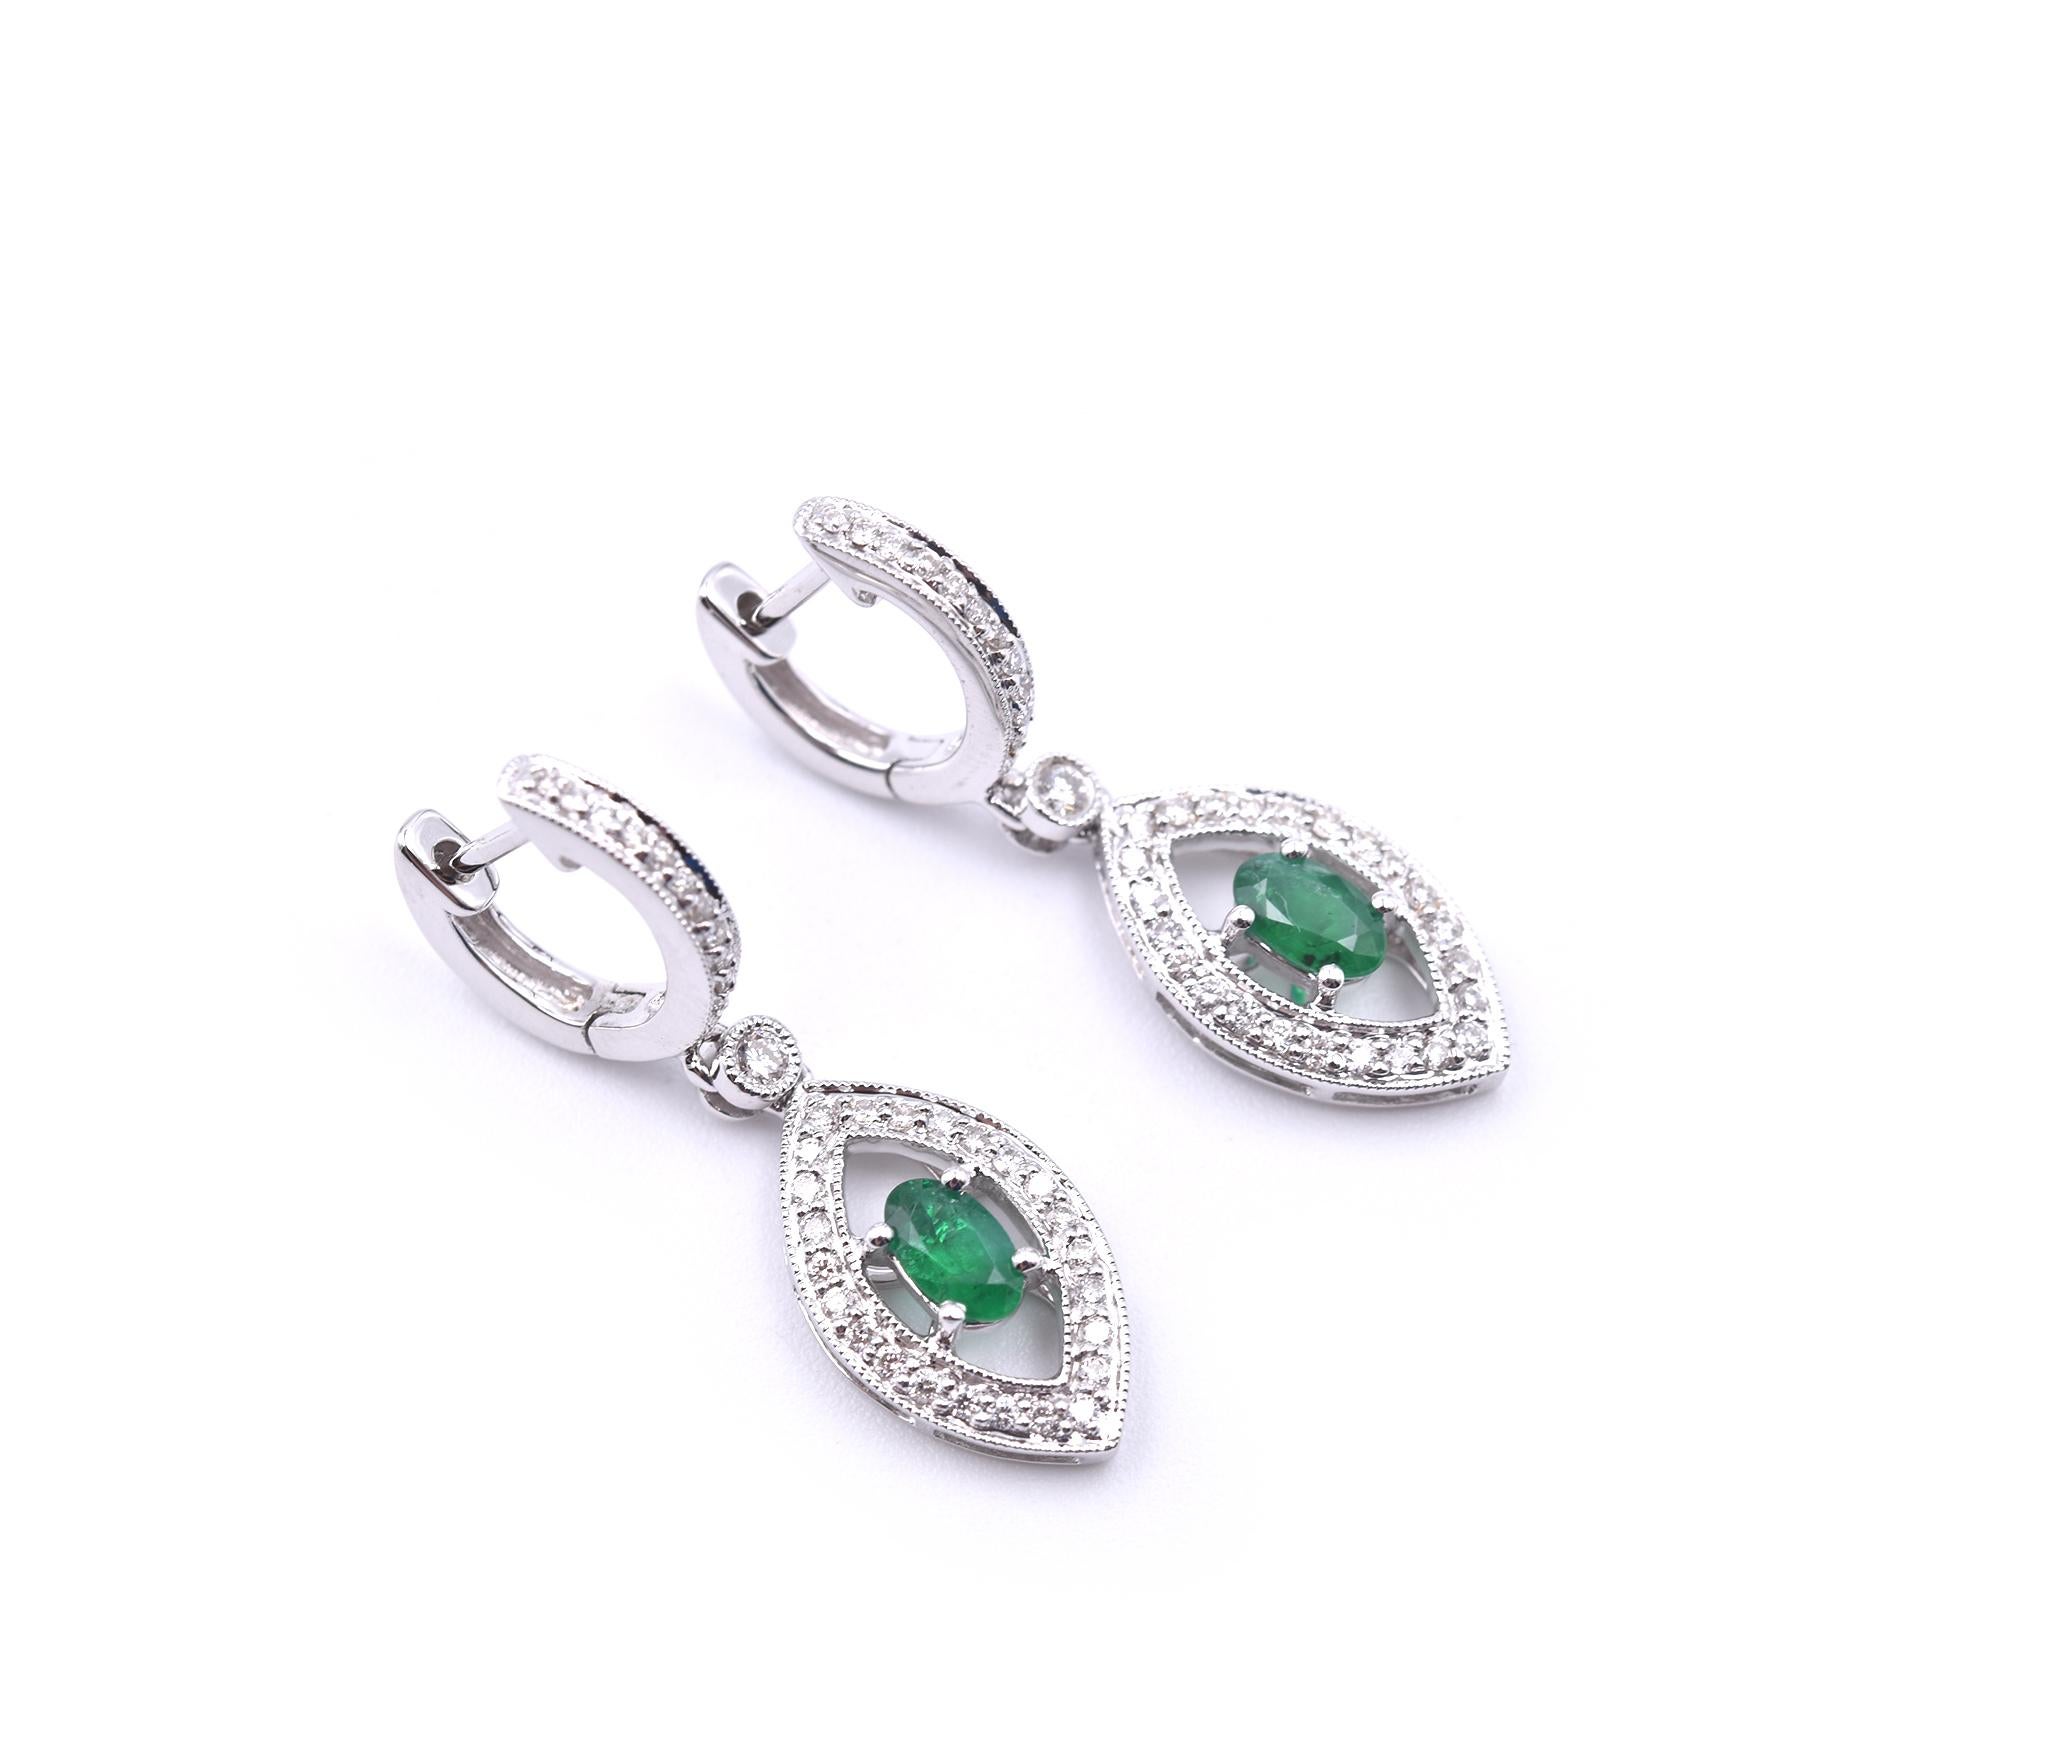 Designer: custom design
Material: 18k white gold
Emeralds: 2 oval cut = 0.60cttw
Diamonds: 72 round brilliant cuts = 0.50cttw
Color: G-H
Clarity: VS
Dimensions: earrings are 8.65mm x 28.5mm
Fastenings: snap closure
Weight: 4.61 grams	
